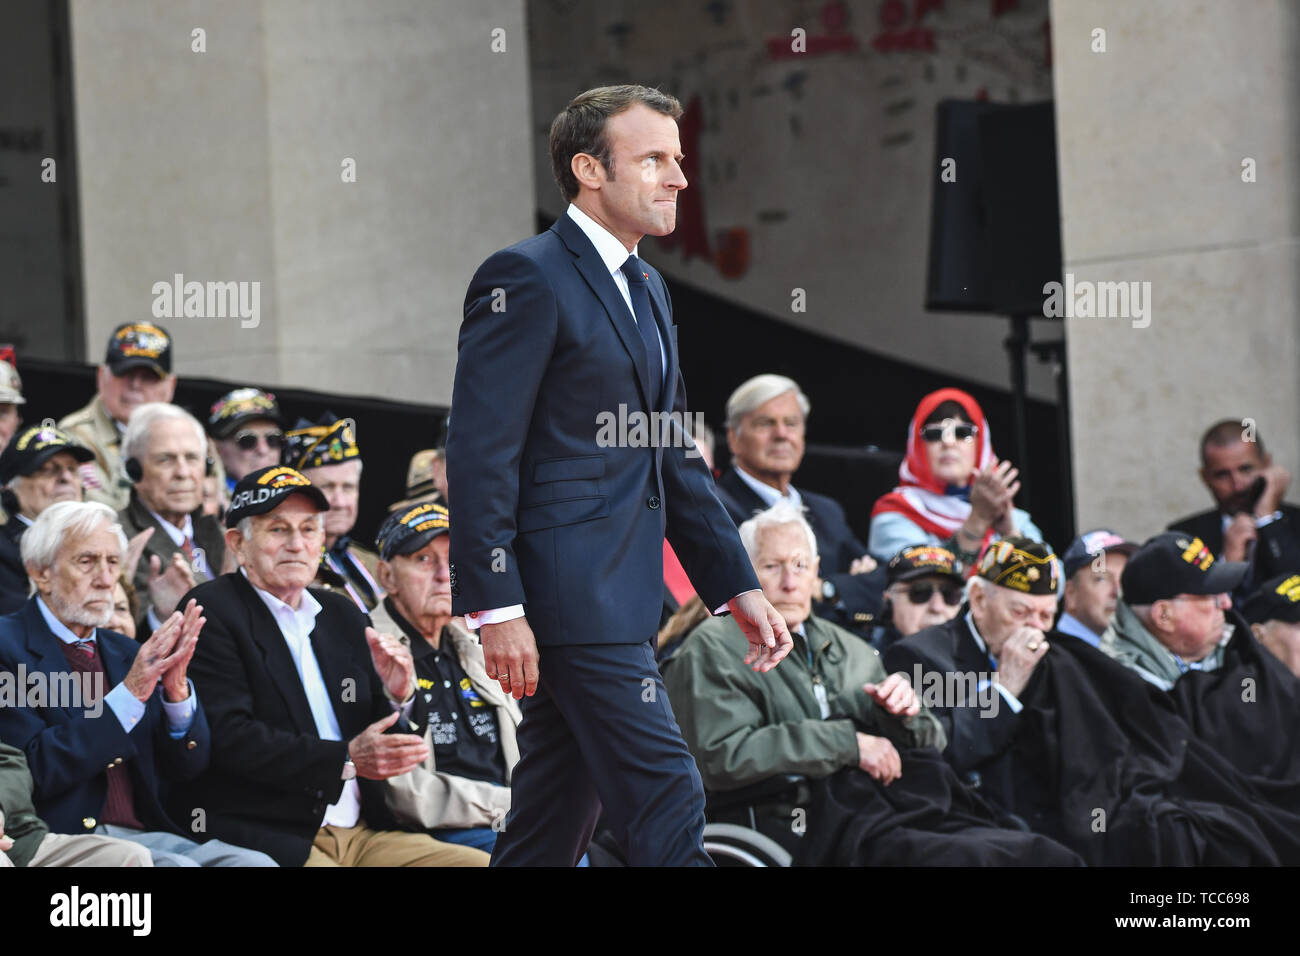 Colleville Sur Mer, France. 06th June, 2019. French President Emmanuel Macron walks to the stage to address a commemoration ceremony marking the 75th D-Day Anniversary at the Normandy American Cemetery and Memorial June 6, 2019 in Colleville-sur-Mer, France. Thousands have converged on Normandy to commemorate the 75th anniversary of Operation Overlord, the WWII Allied invasion commonly known as D-Day. Credit: Planetpix/Alamy Live News Stock Photo